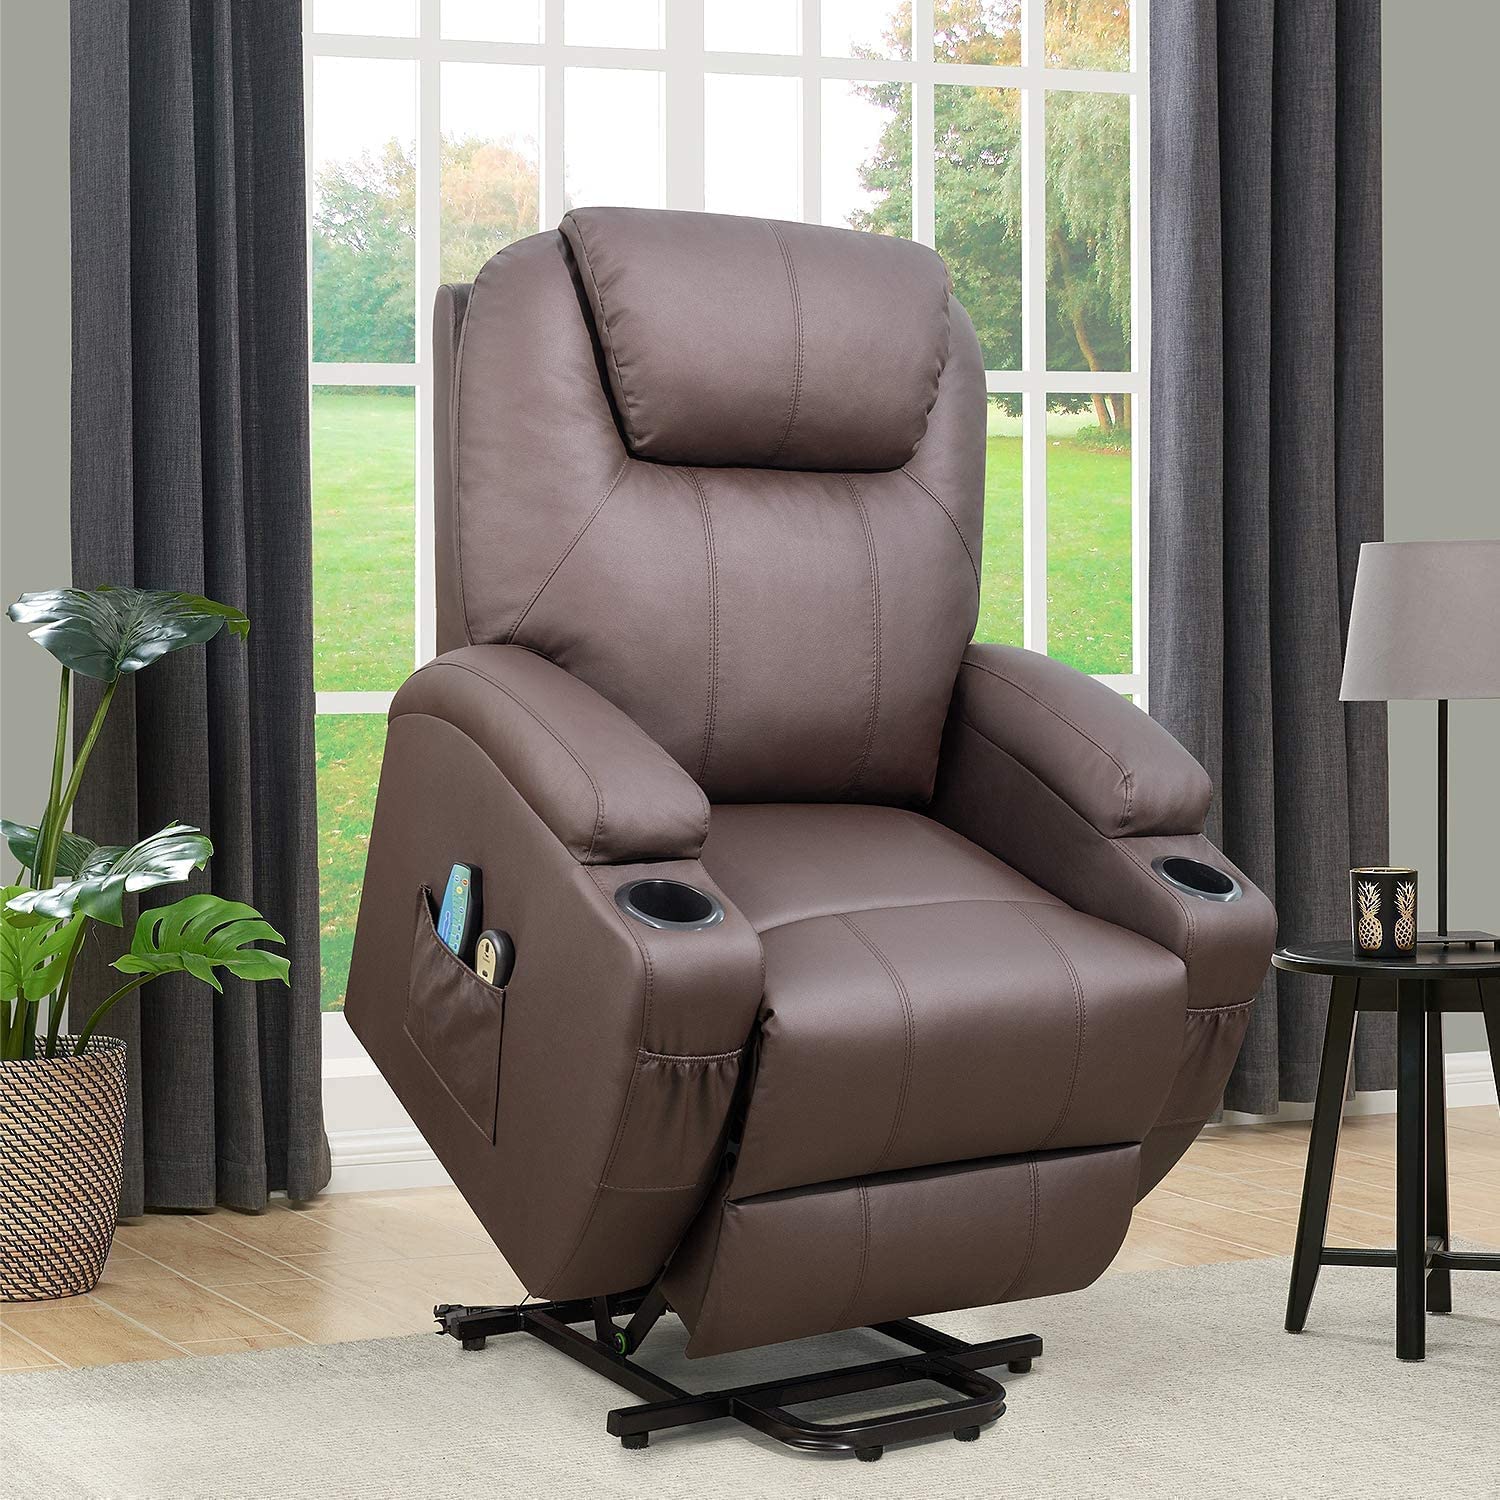 Flamaker Power Lift Recliner Chair PU Leather for Elderly with Massage and Heating Ergonomic Lounge Chair